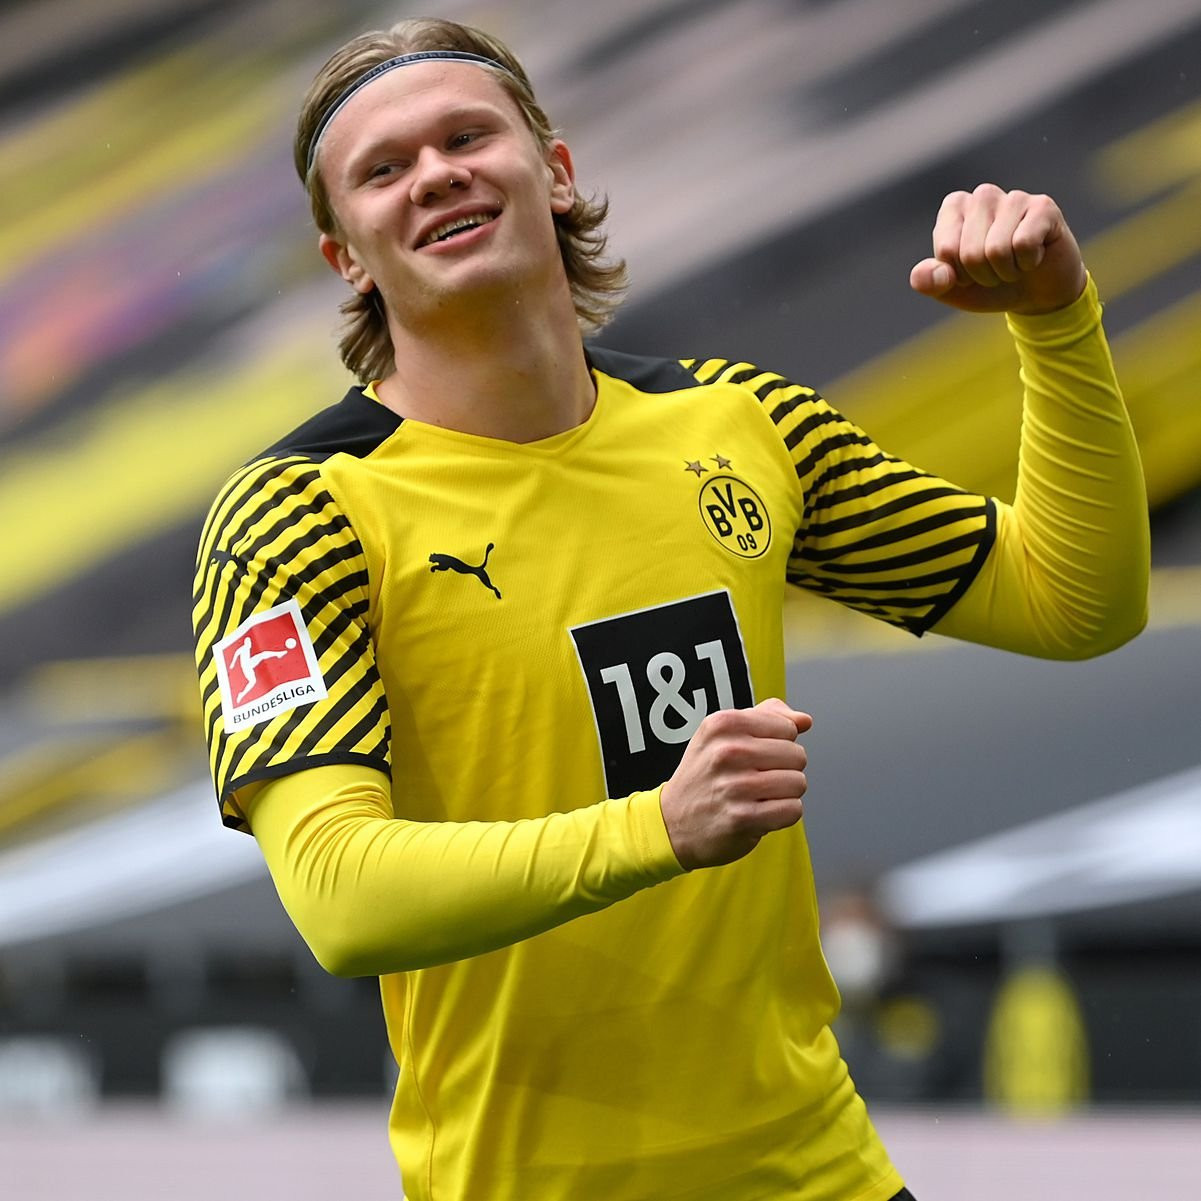 Chelsea reportedly agree personal terms with Borussia Dortmund forward Erling Haaland